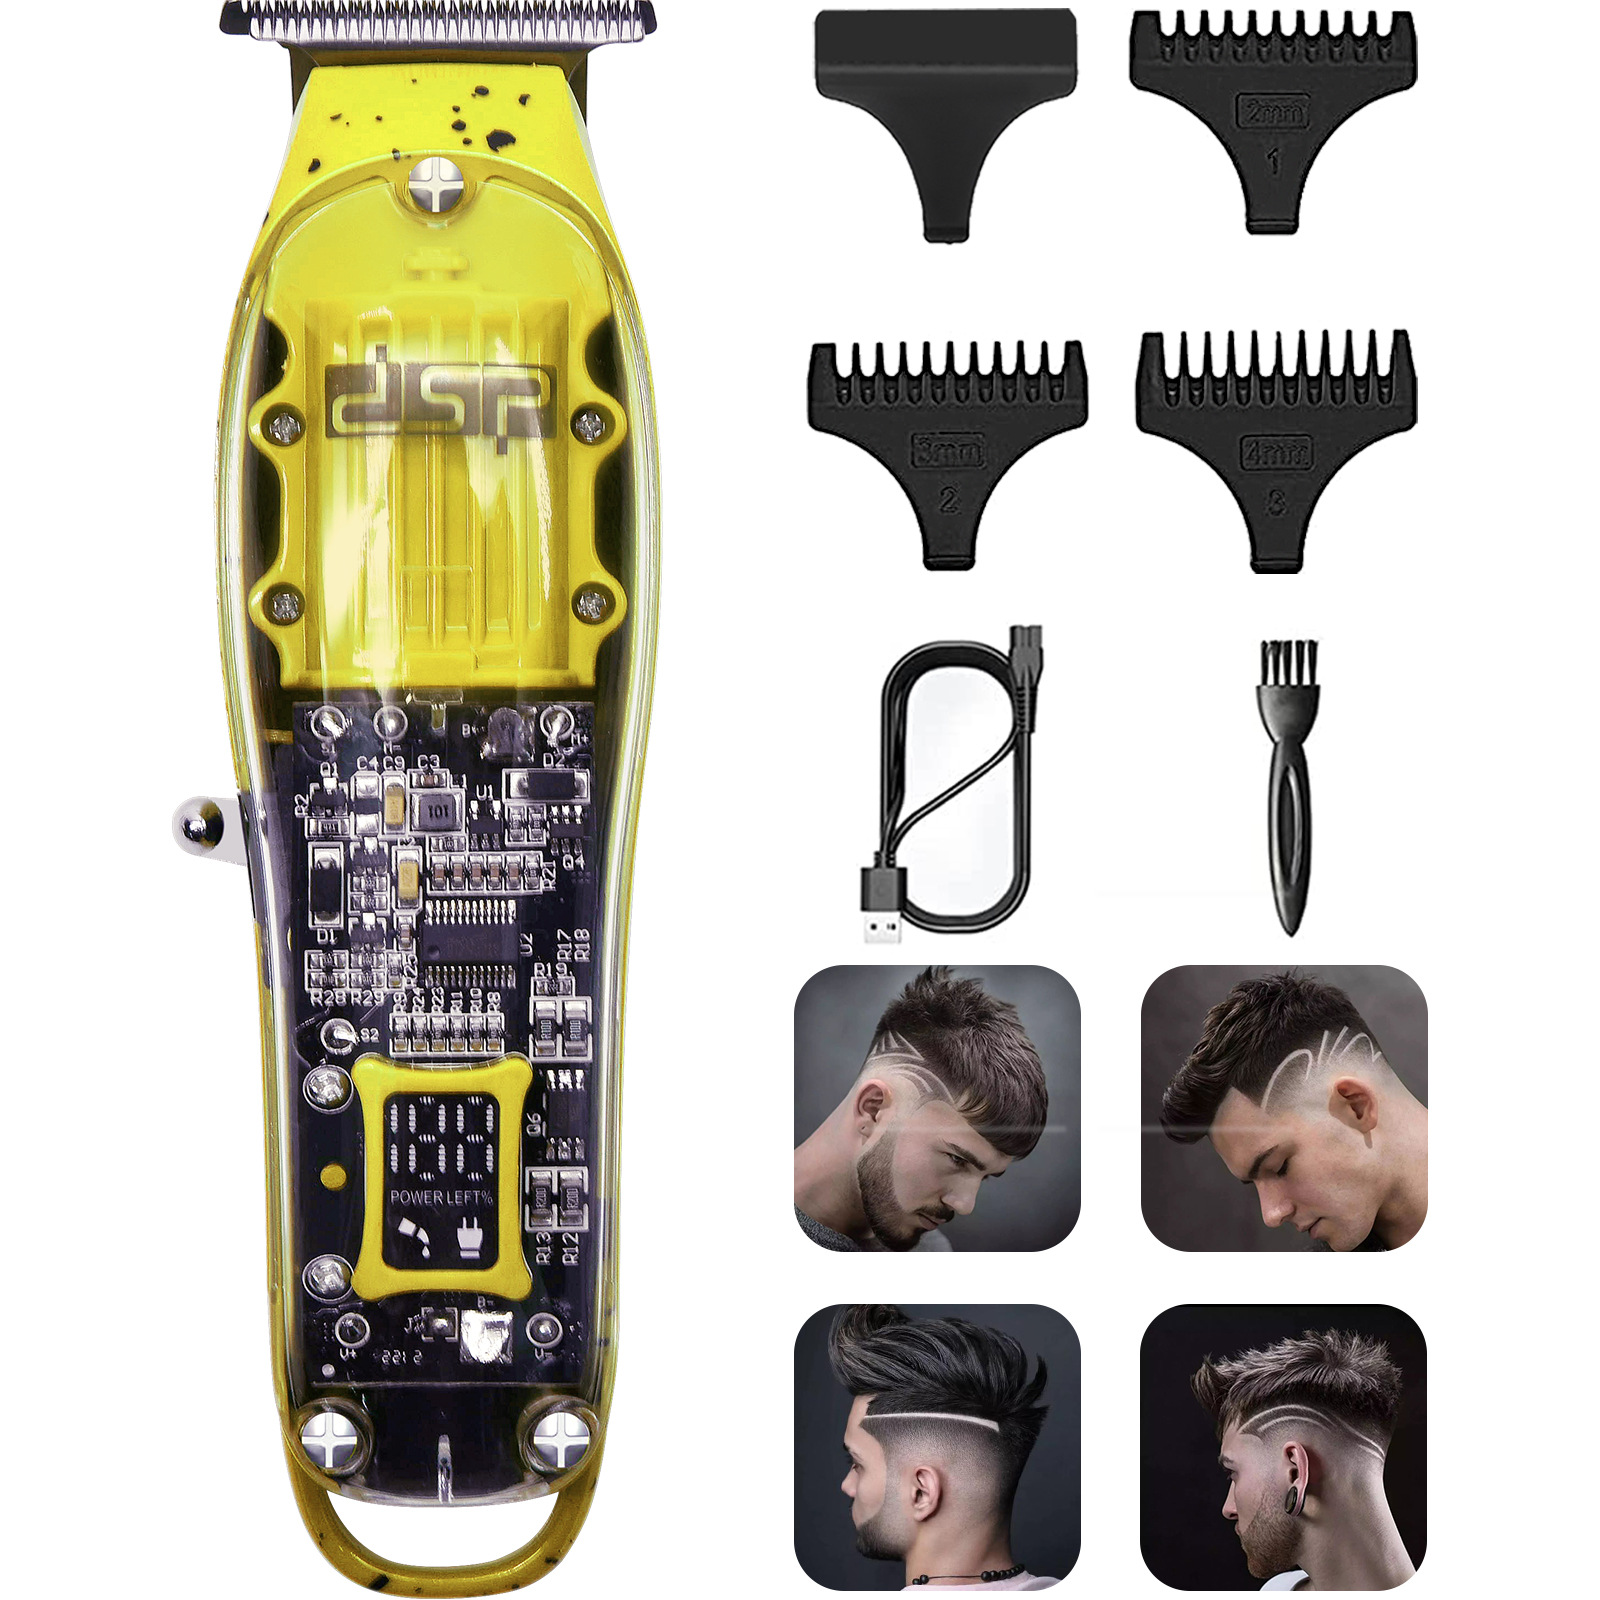 DSP Dan Song Barber Electric clippers USB Rechargeable Clippers currency Tim Electric Razor